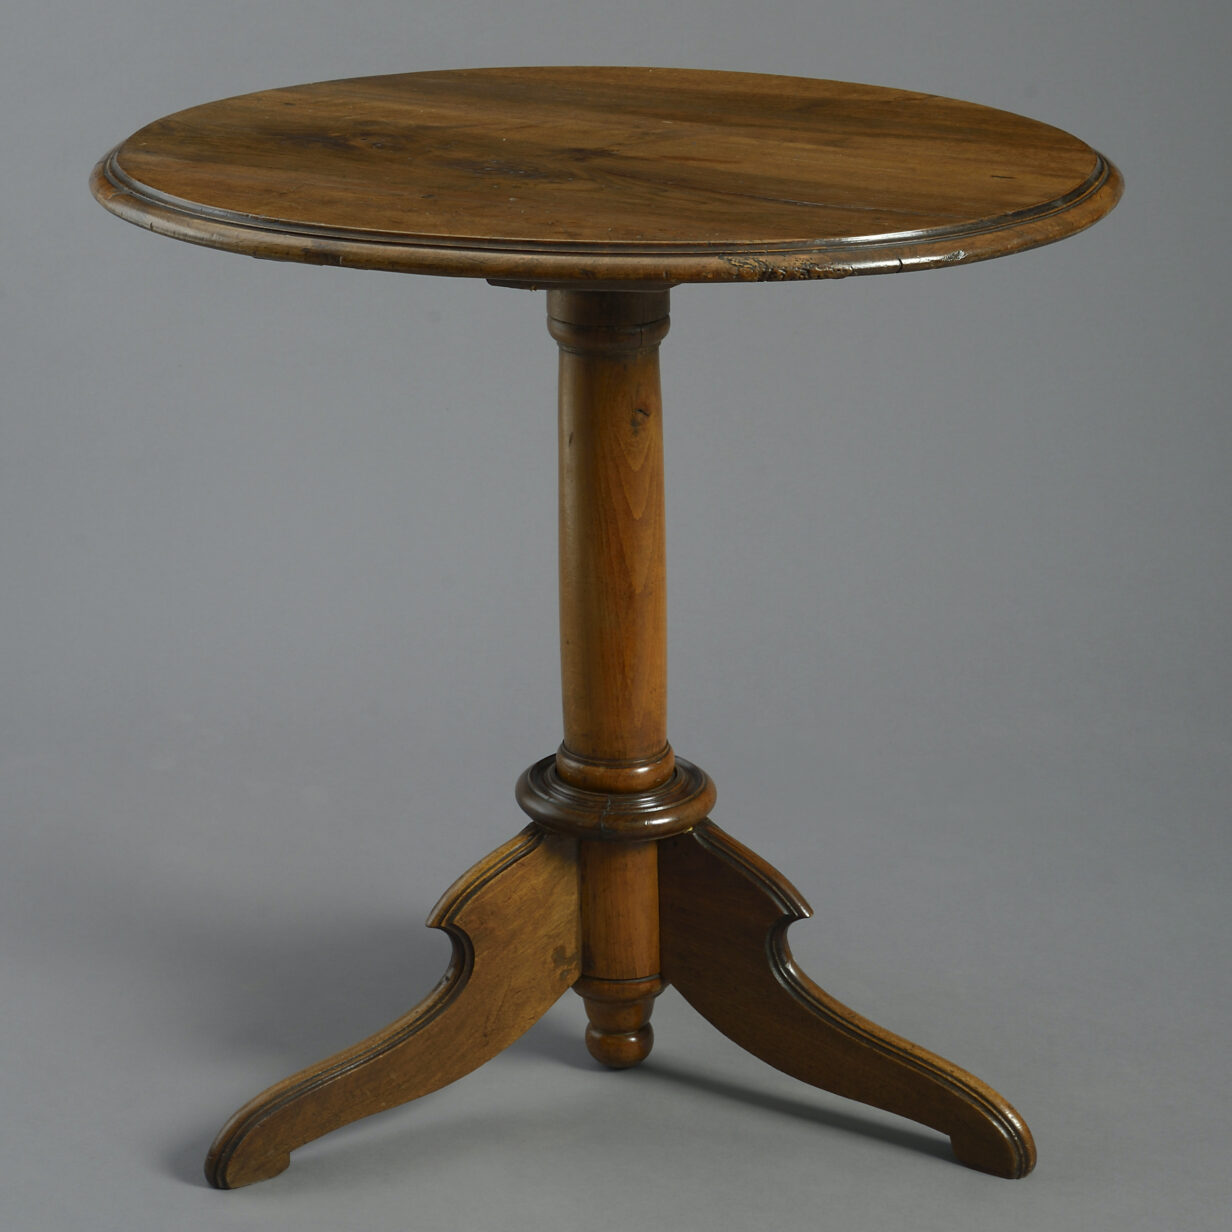 Early 19th century walnut occasional table